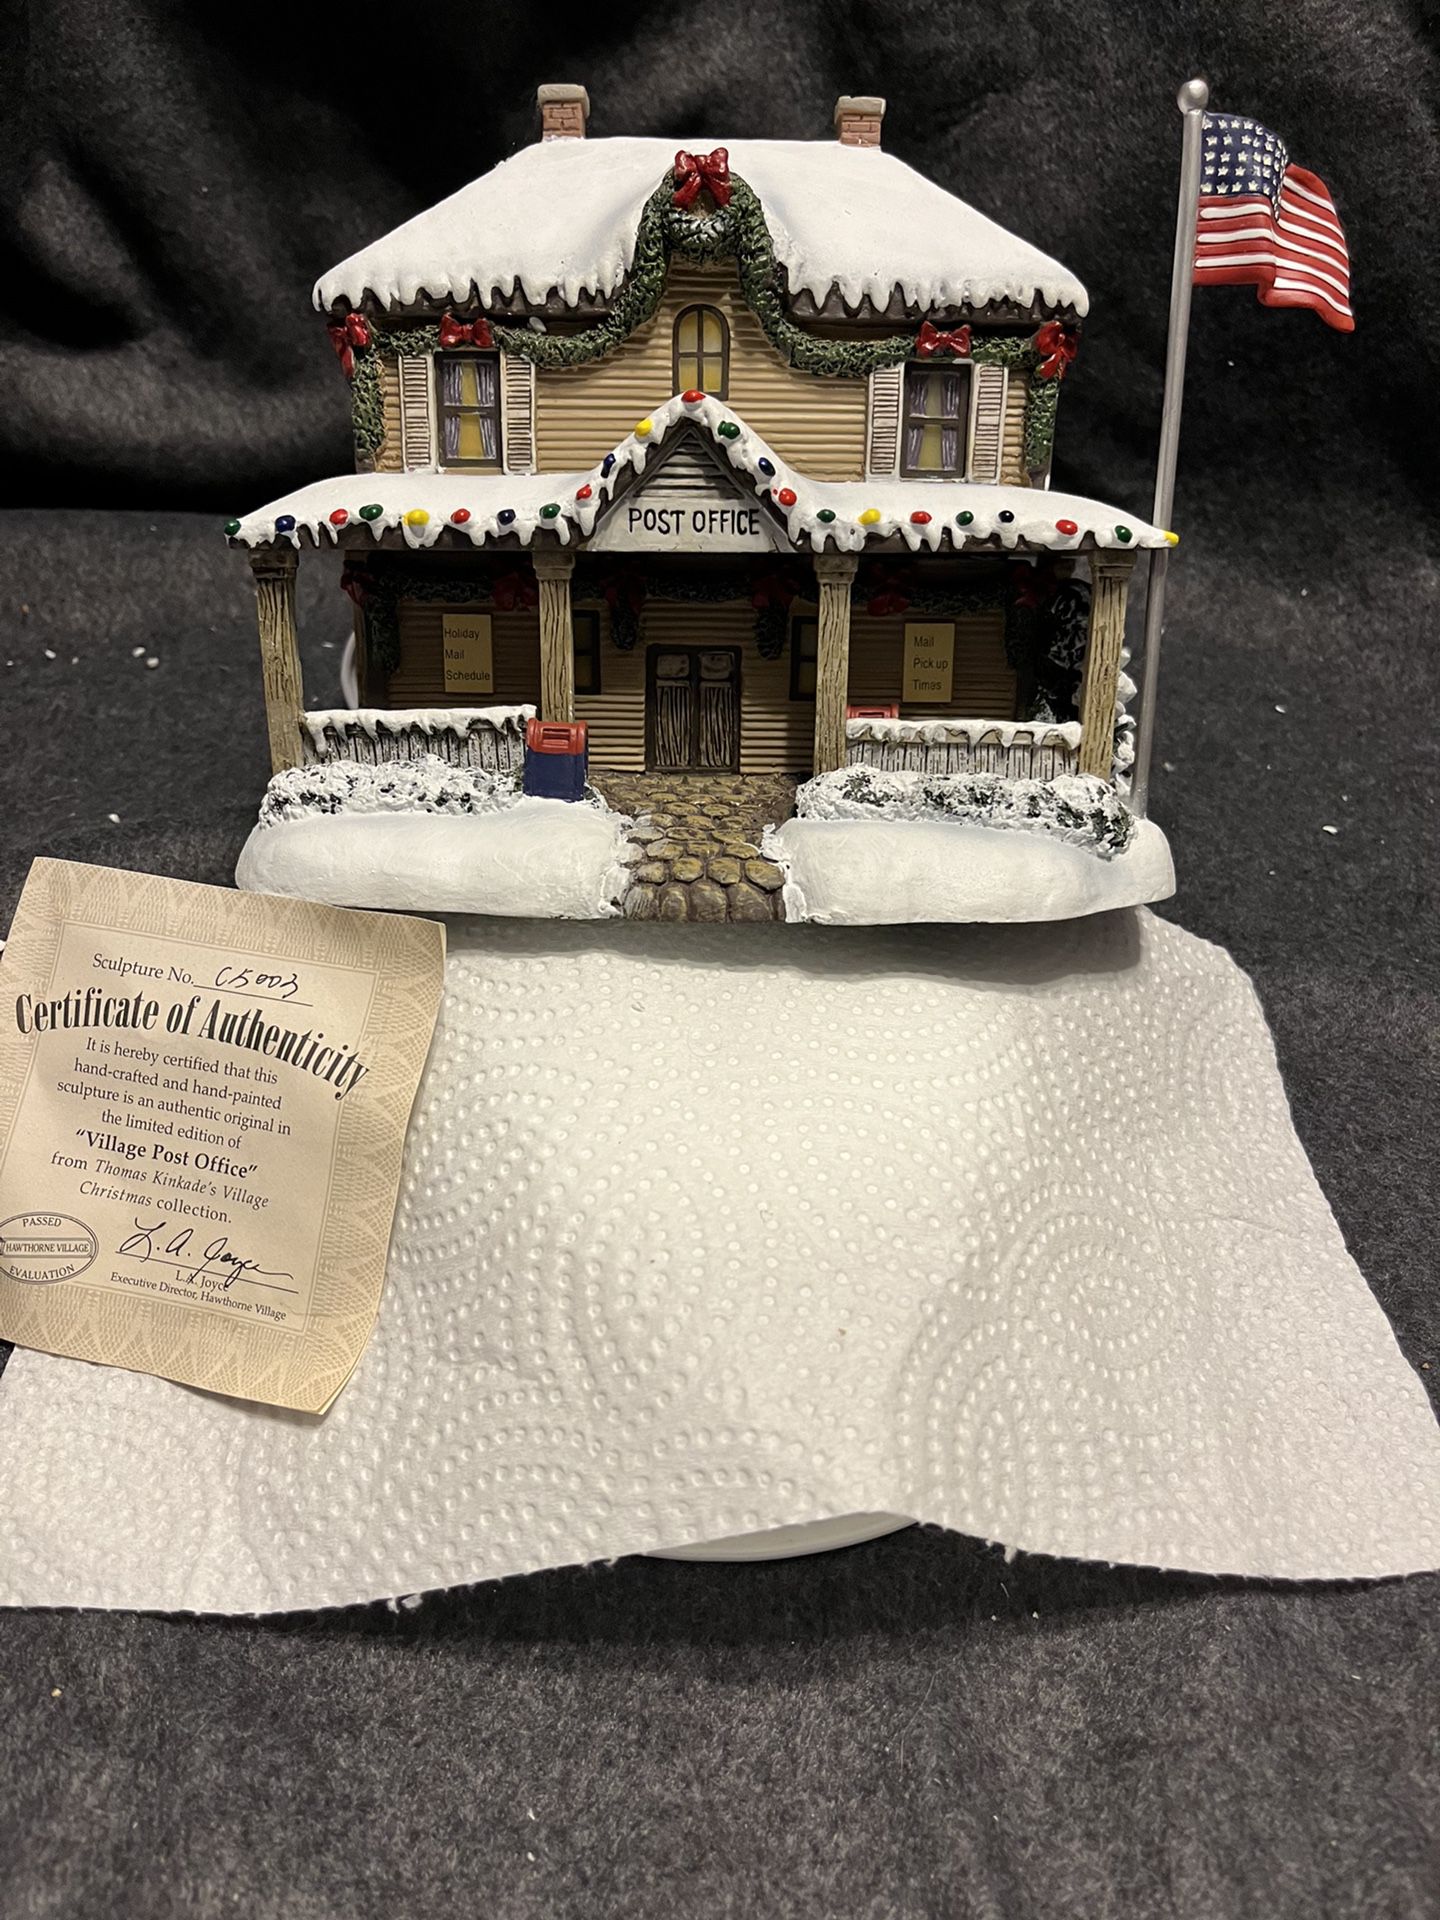 7  “Thomas Kinkade ‘s “ Village Christmas Collection , Each Come with cord that allows them to light up with switch